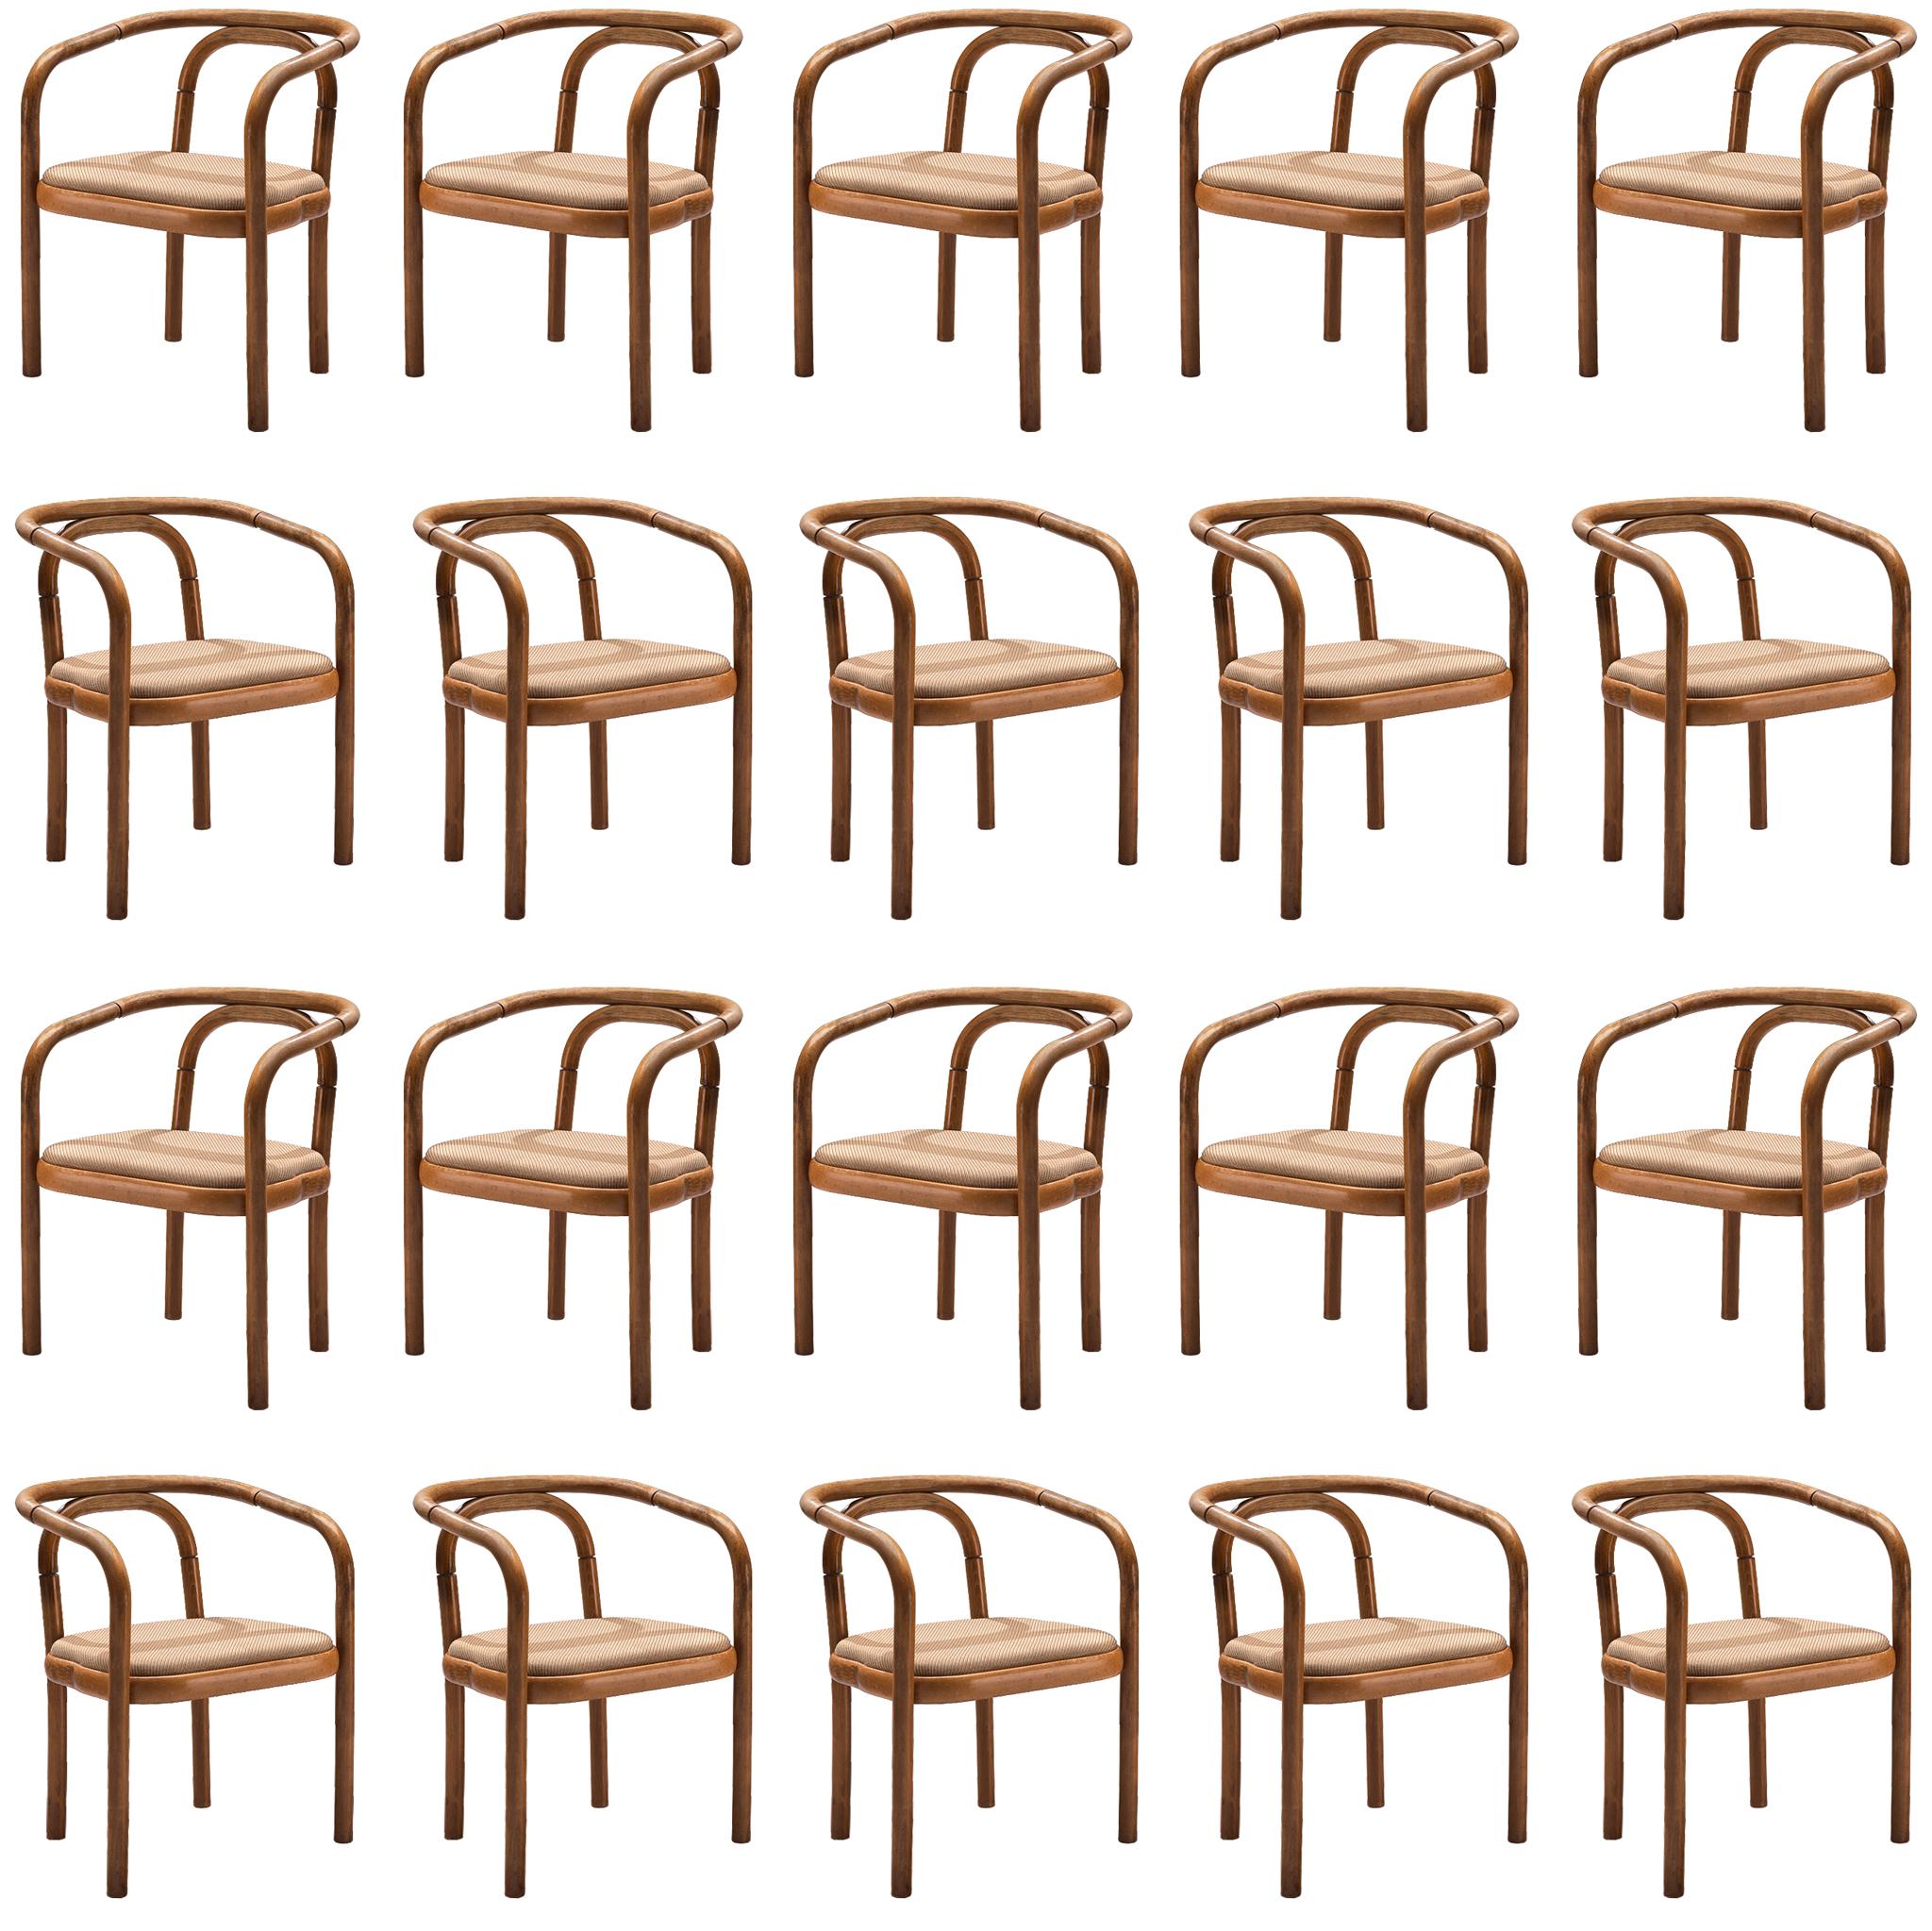 Large Set of +70 Bentwood Dining Chairs by Ton, 1960s